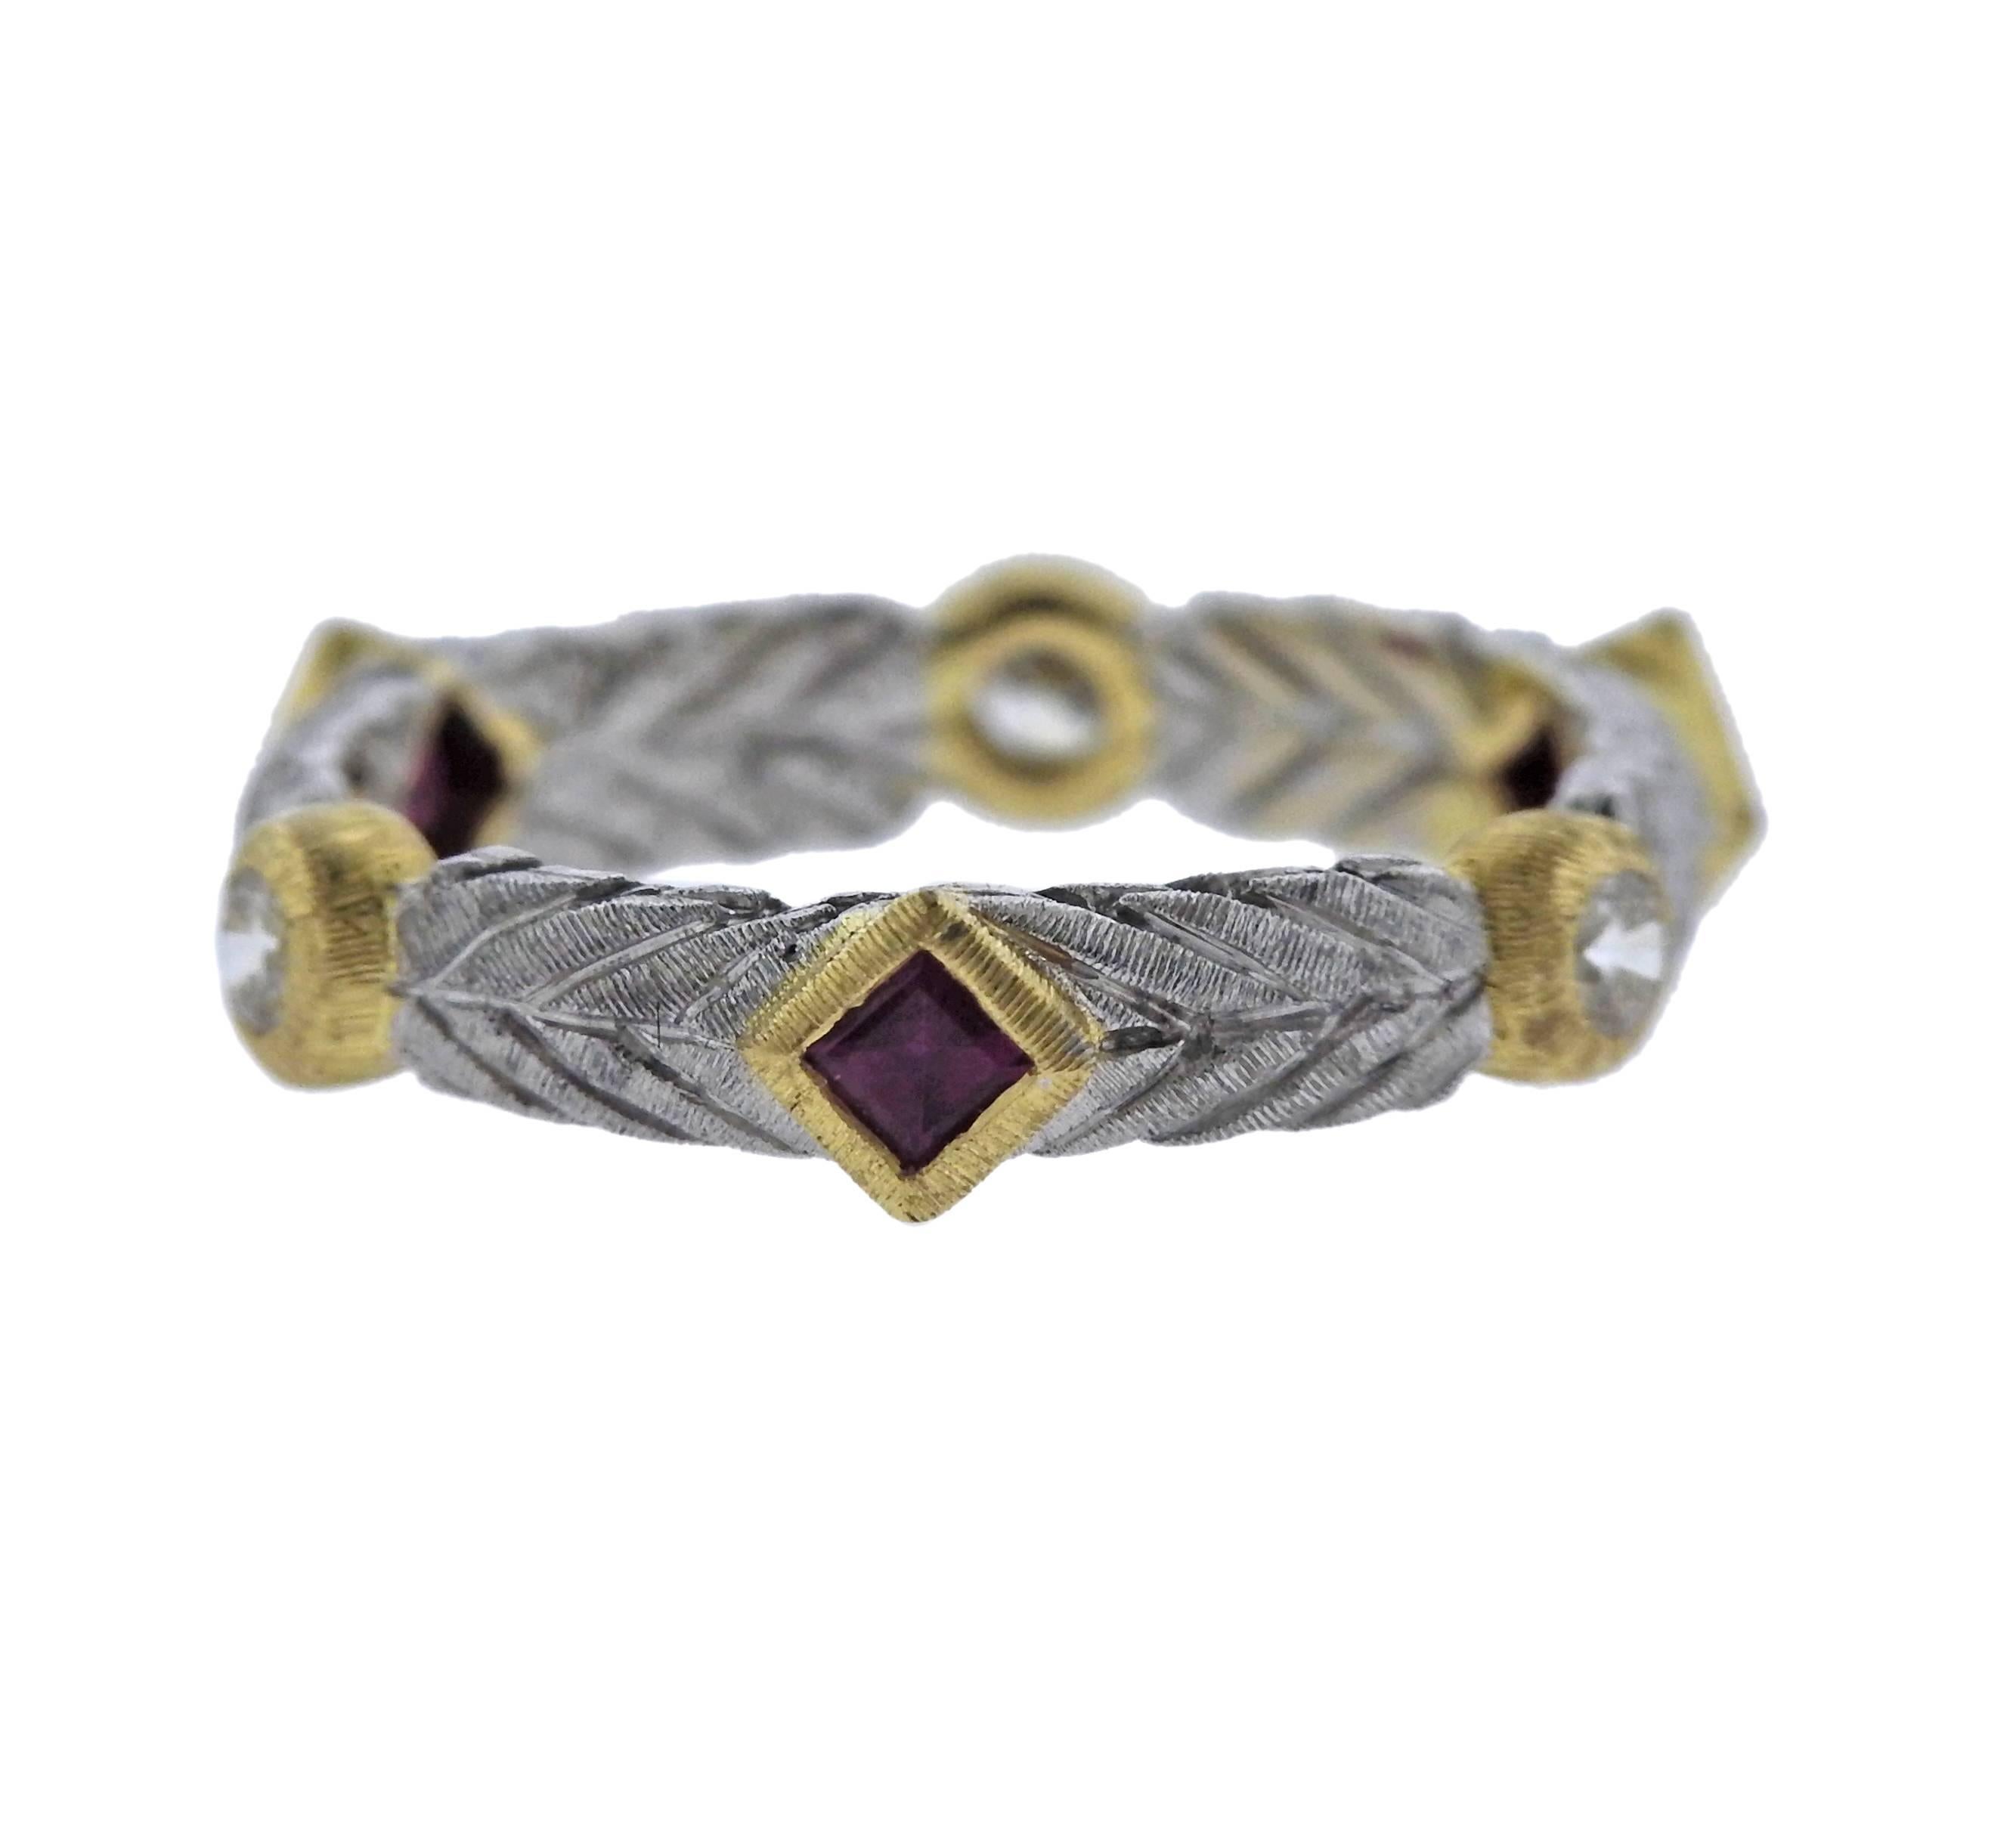 18k gold band ring, adorned with rubies and approx. 0.20ctw in H/VS diamonds, designed by Buccellati. Retail $4800. Ring size - 6, ring top is 4.2mm wide, weighs 3.5 grams. Marked: Buccellati, 750, 18k.